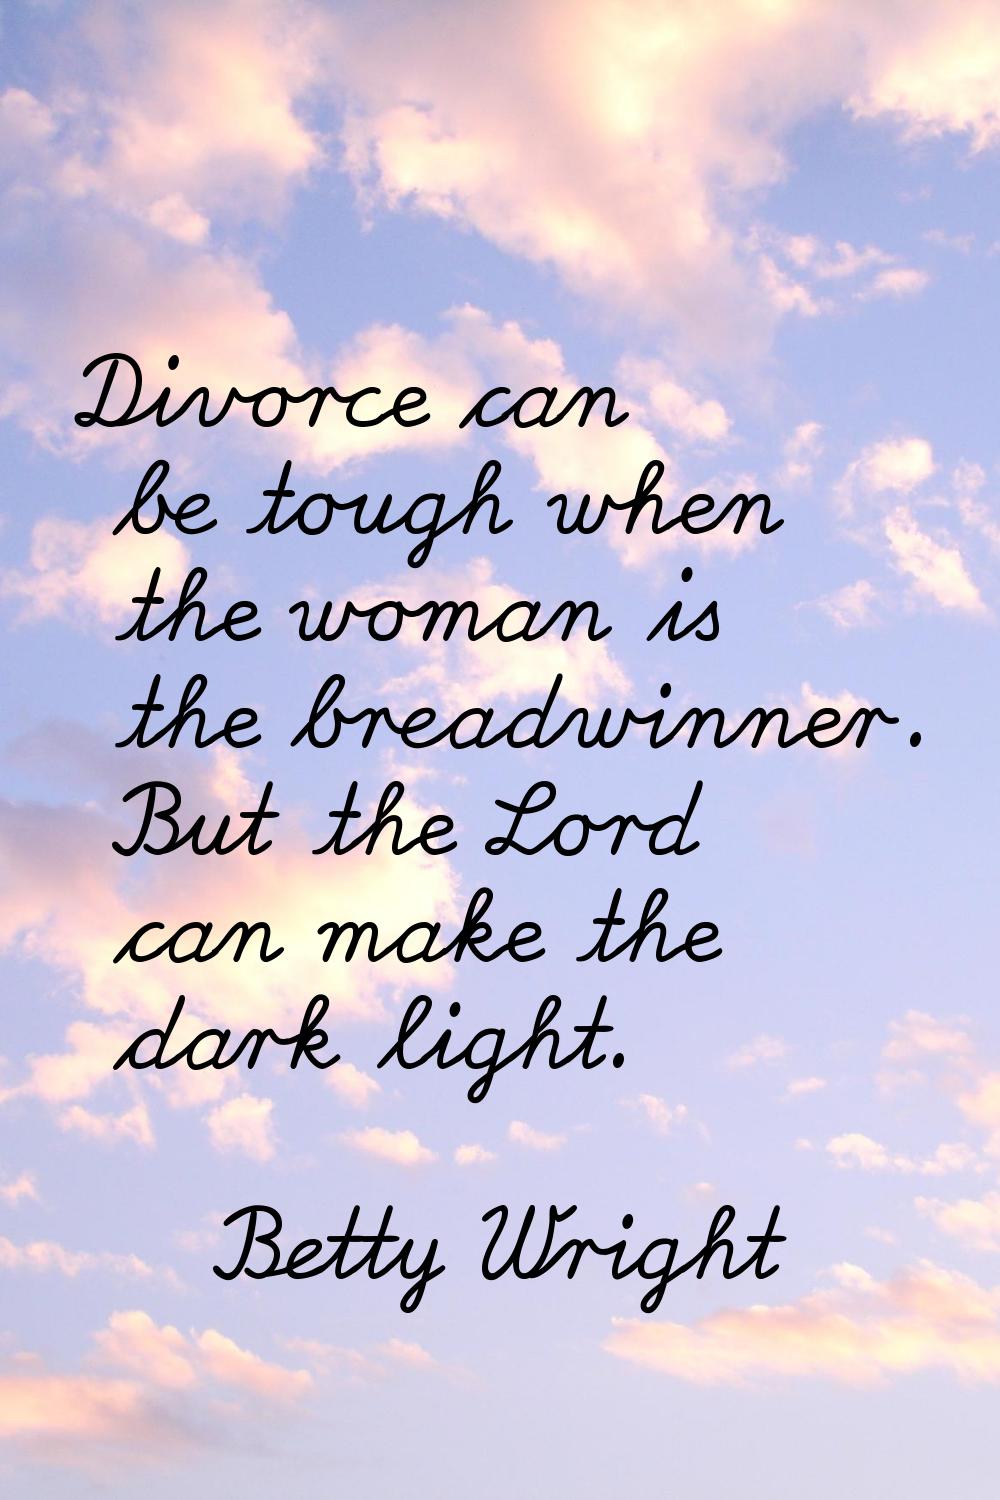 Divorce can be tough when the woman is the breadwinner. But the Lord can make the dark light.